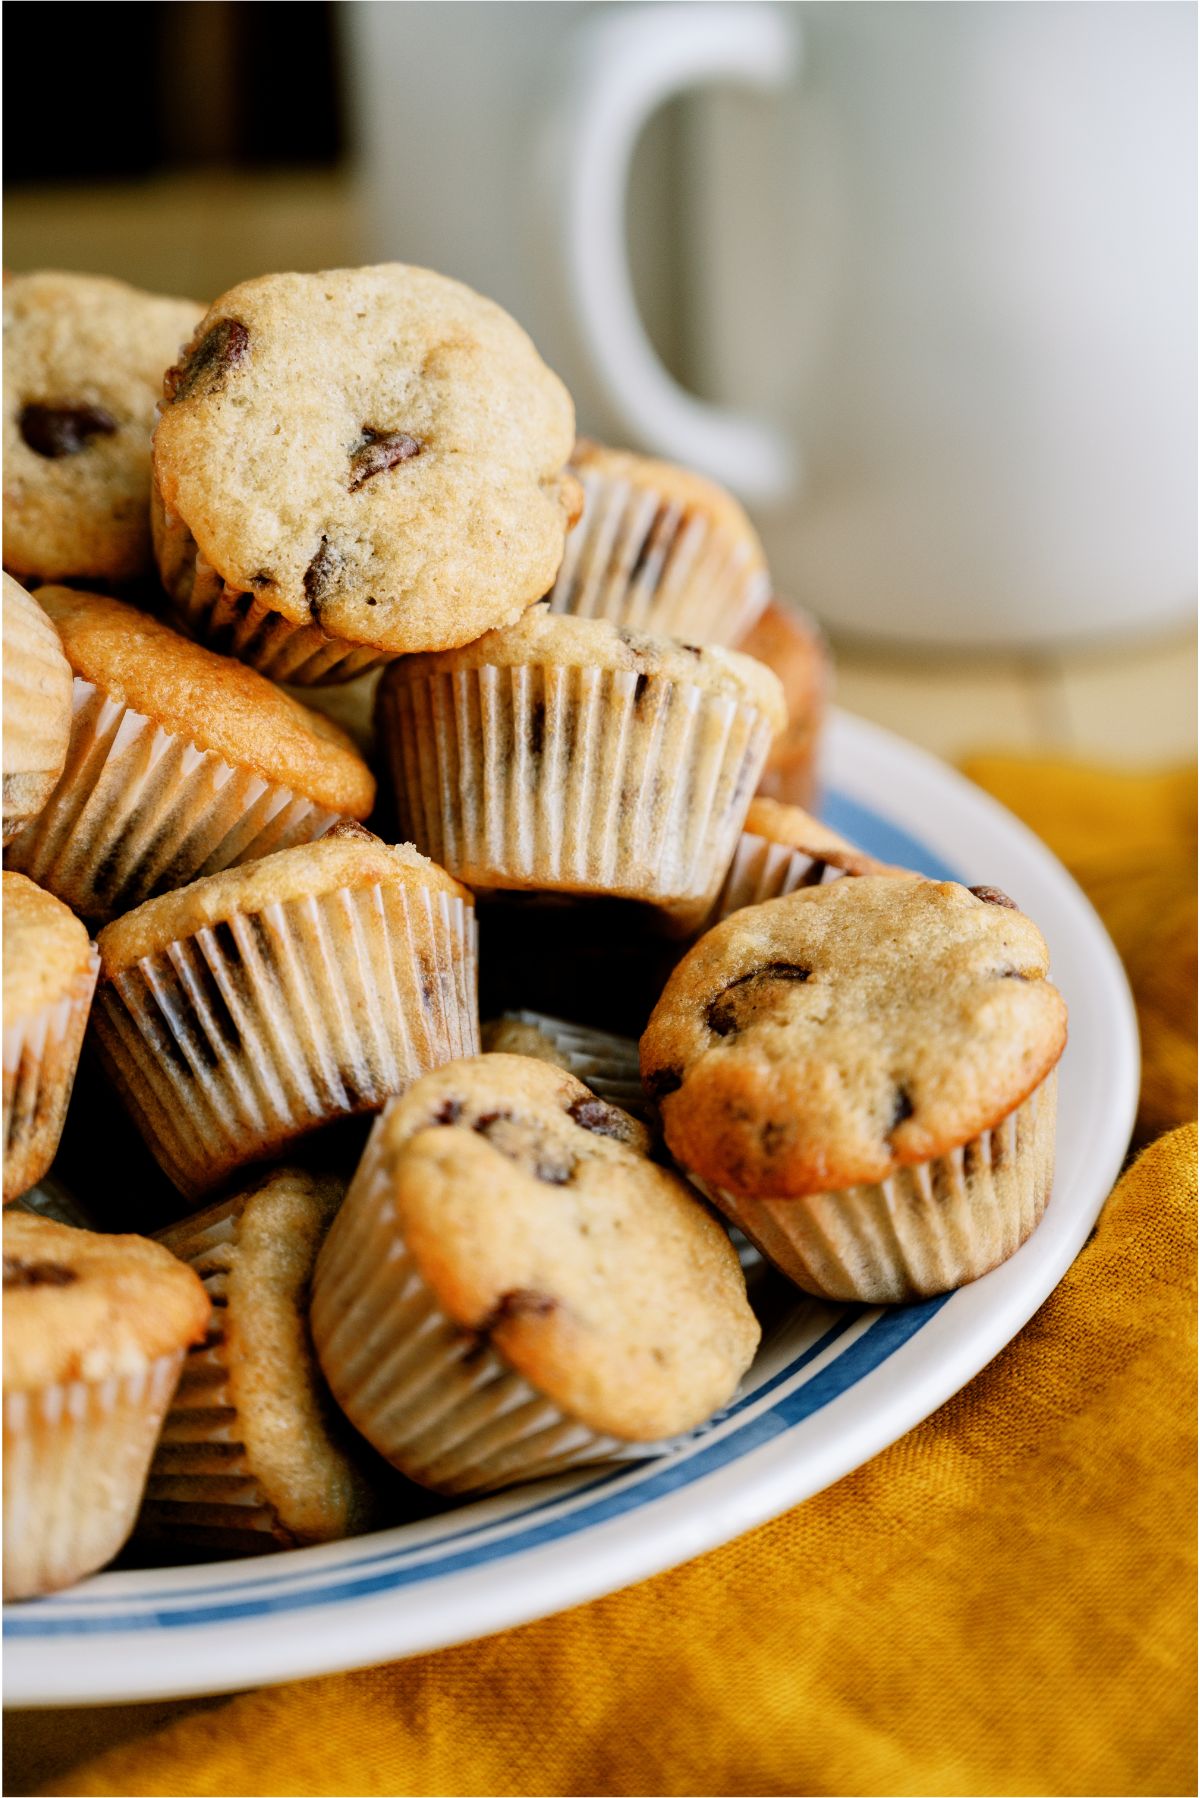 A plate stacked with Mini Banana Muffins